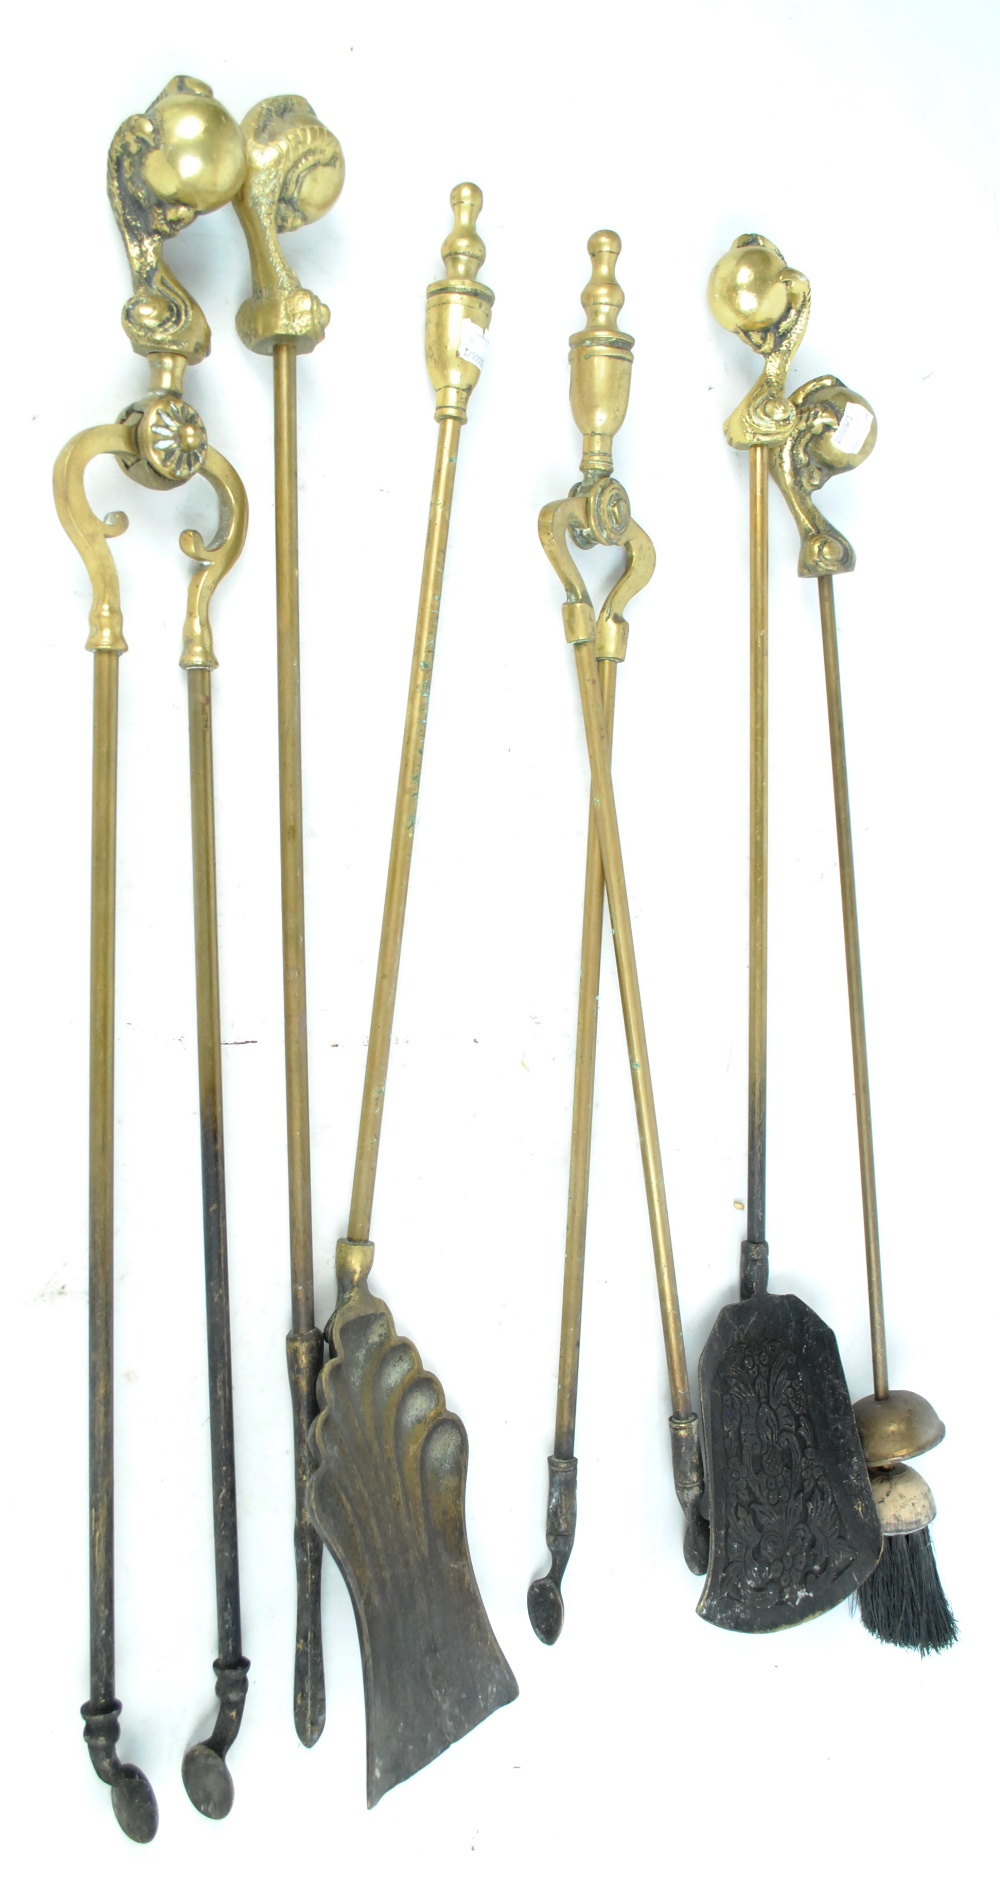 A four piece brass companion set with ball and claw handles, a further pair of tongs and shovel,